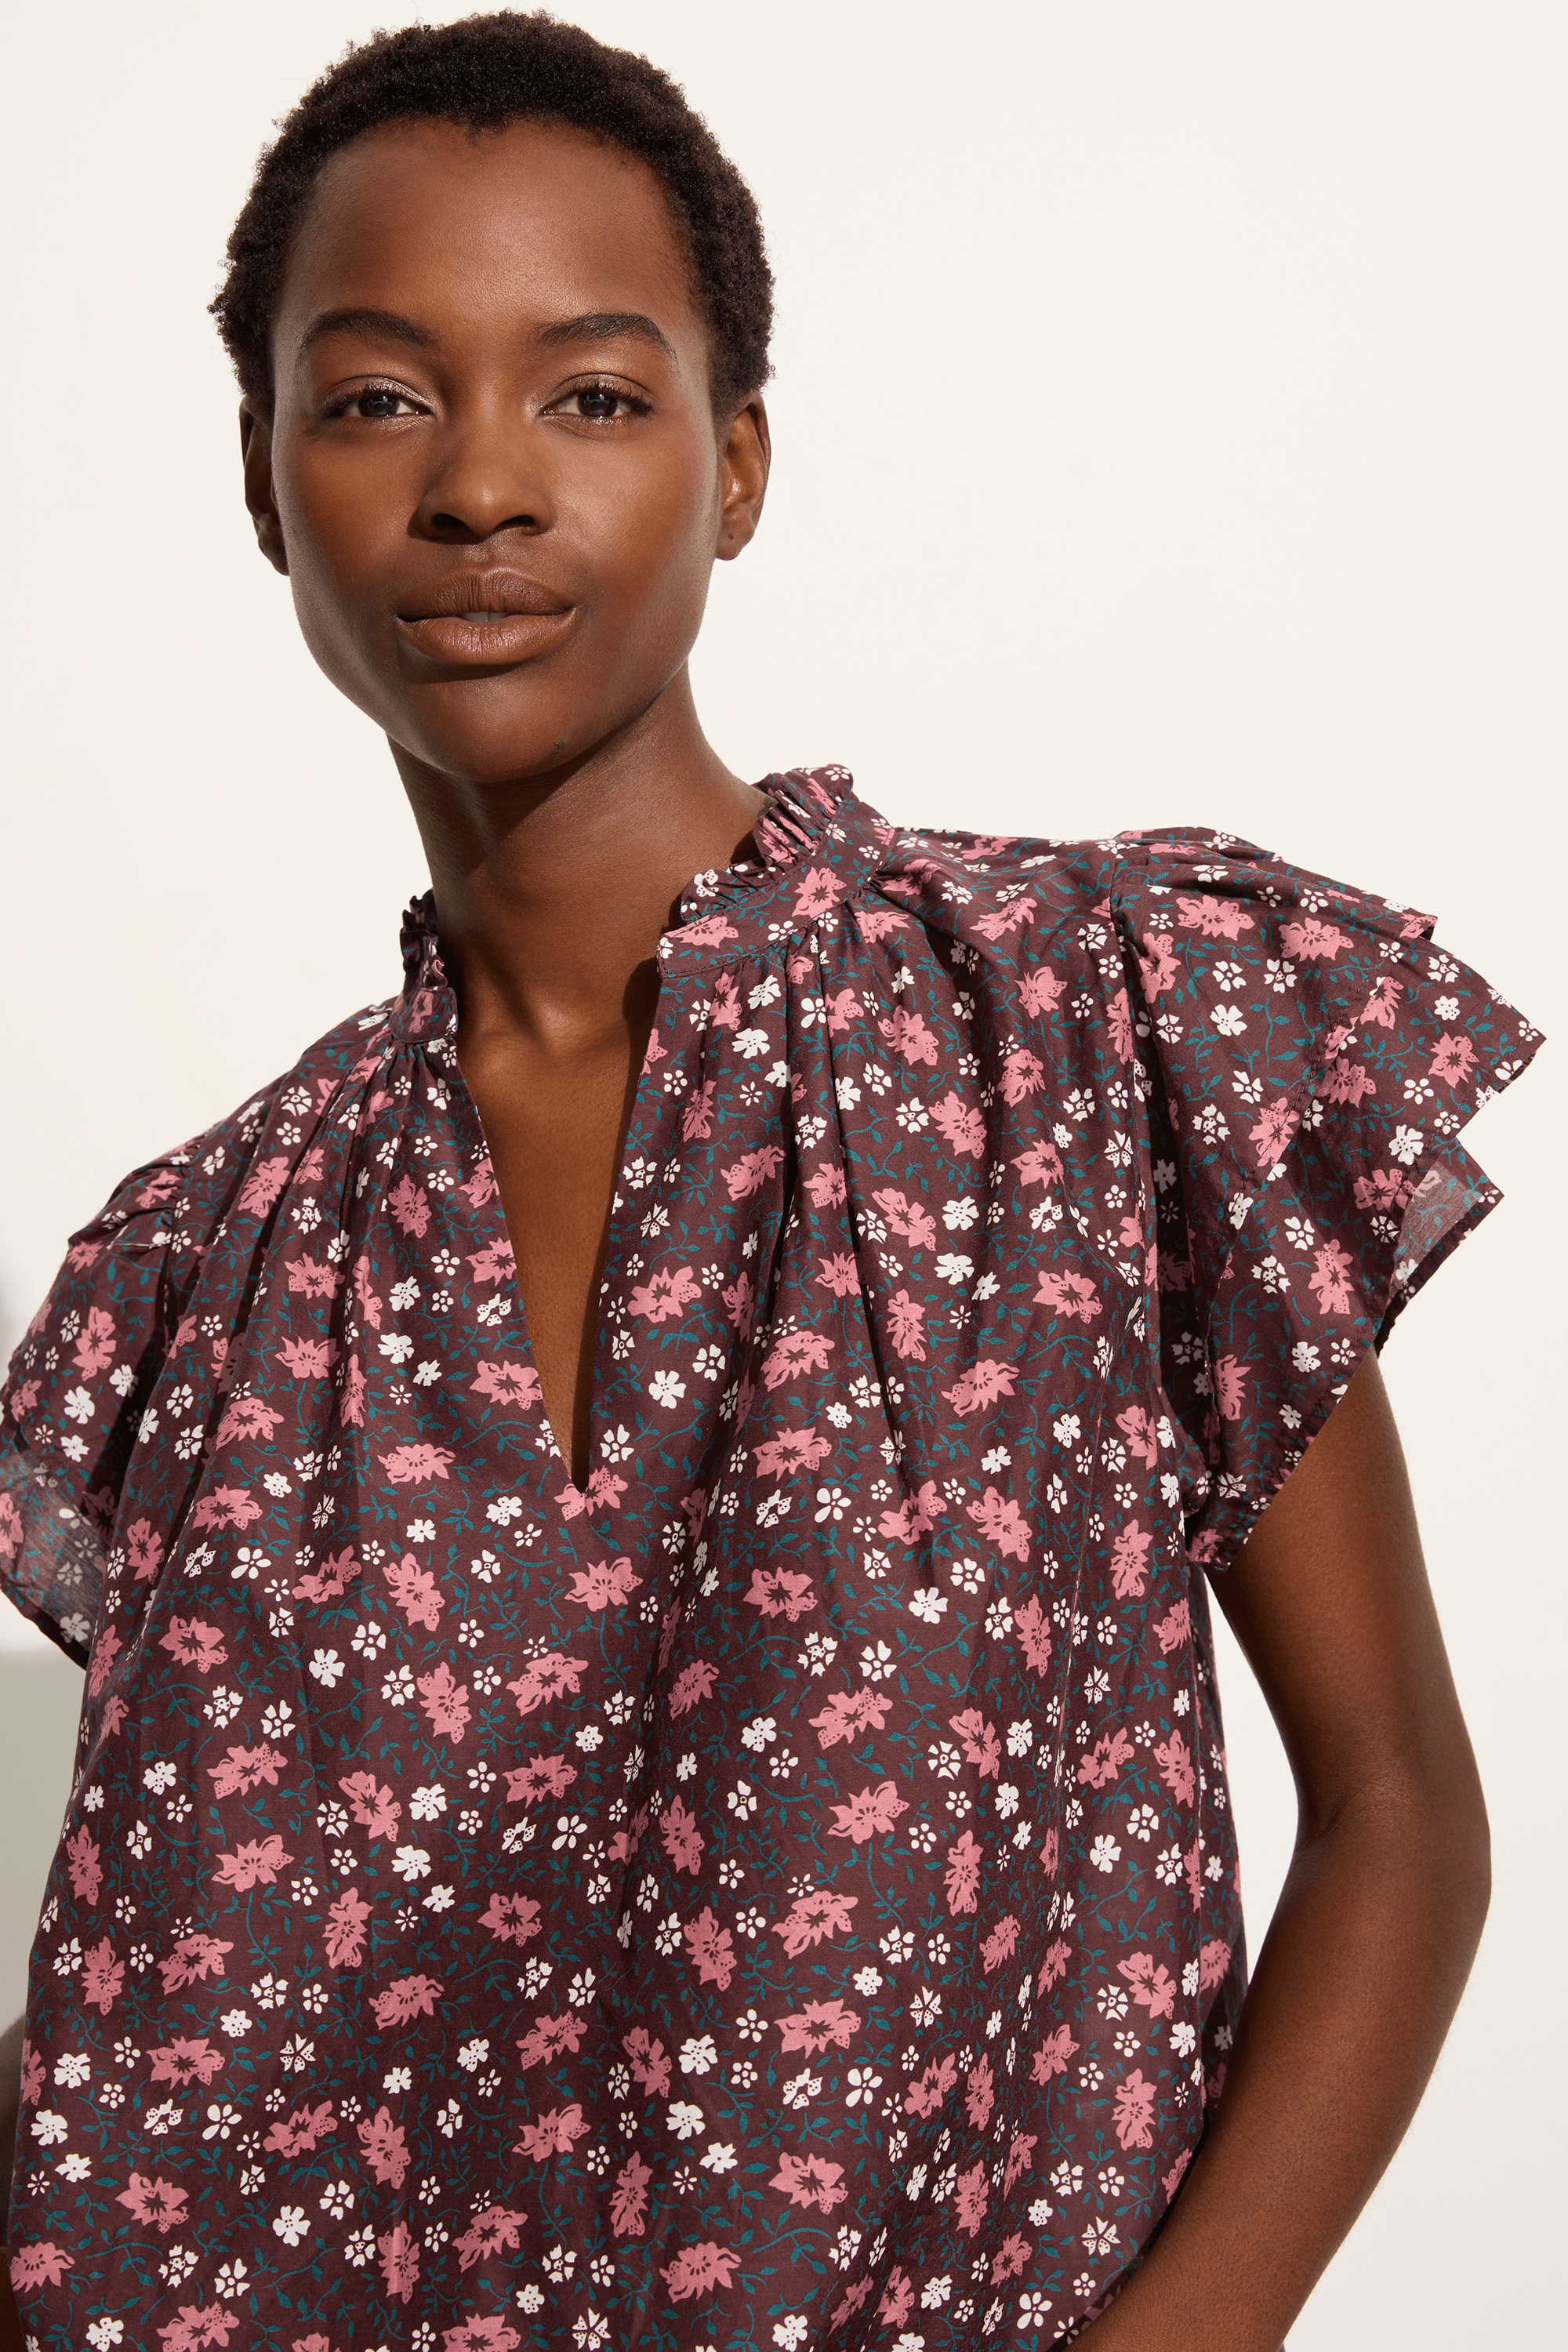 Birds of Paradis by Trovata Clover blouse in plum blossom